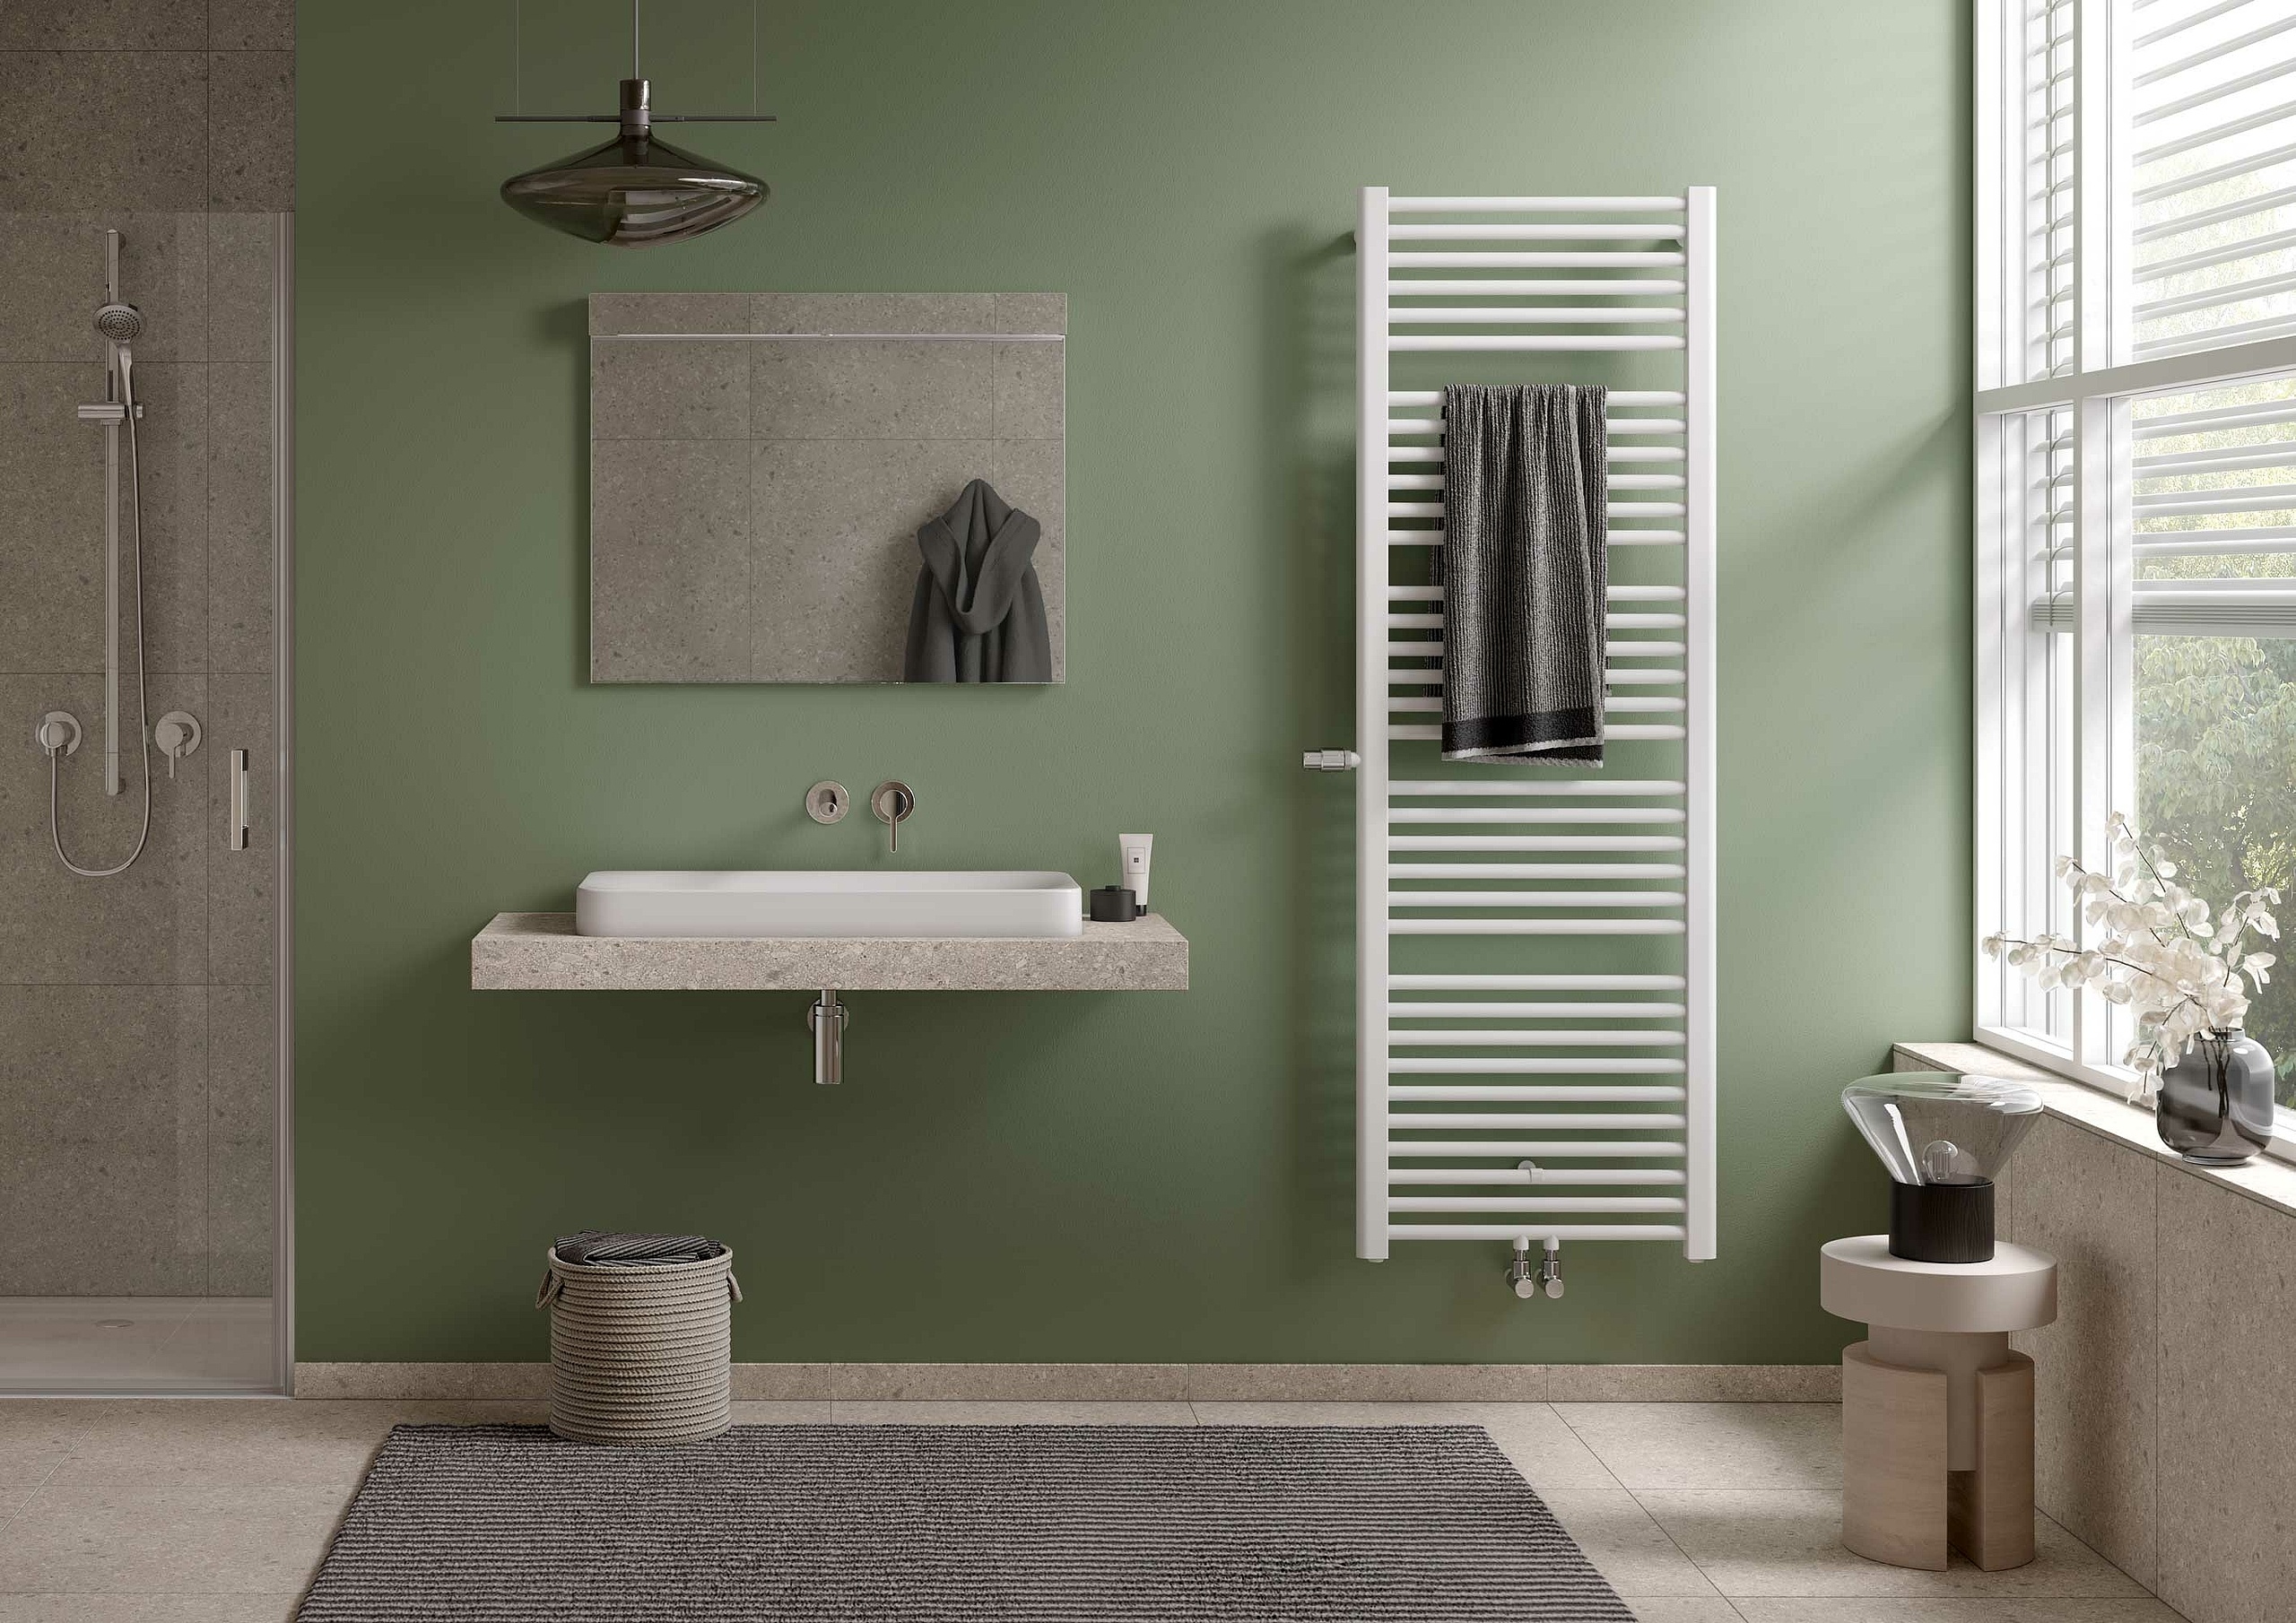 The Kermi Basic plus design and bathroom radiator is available in many different heights and lengths.